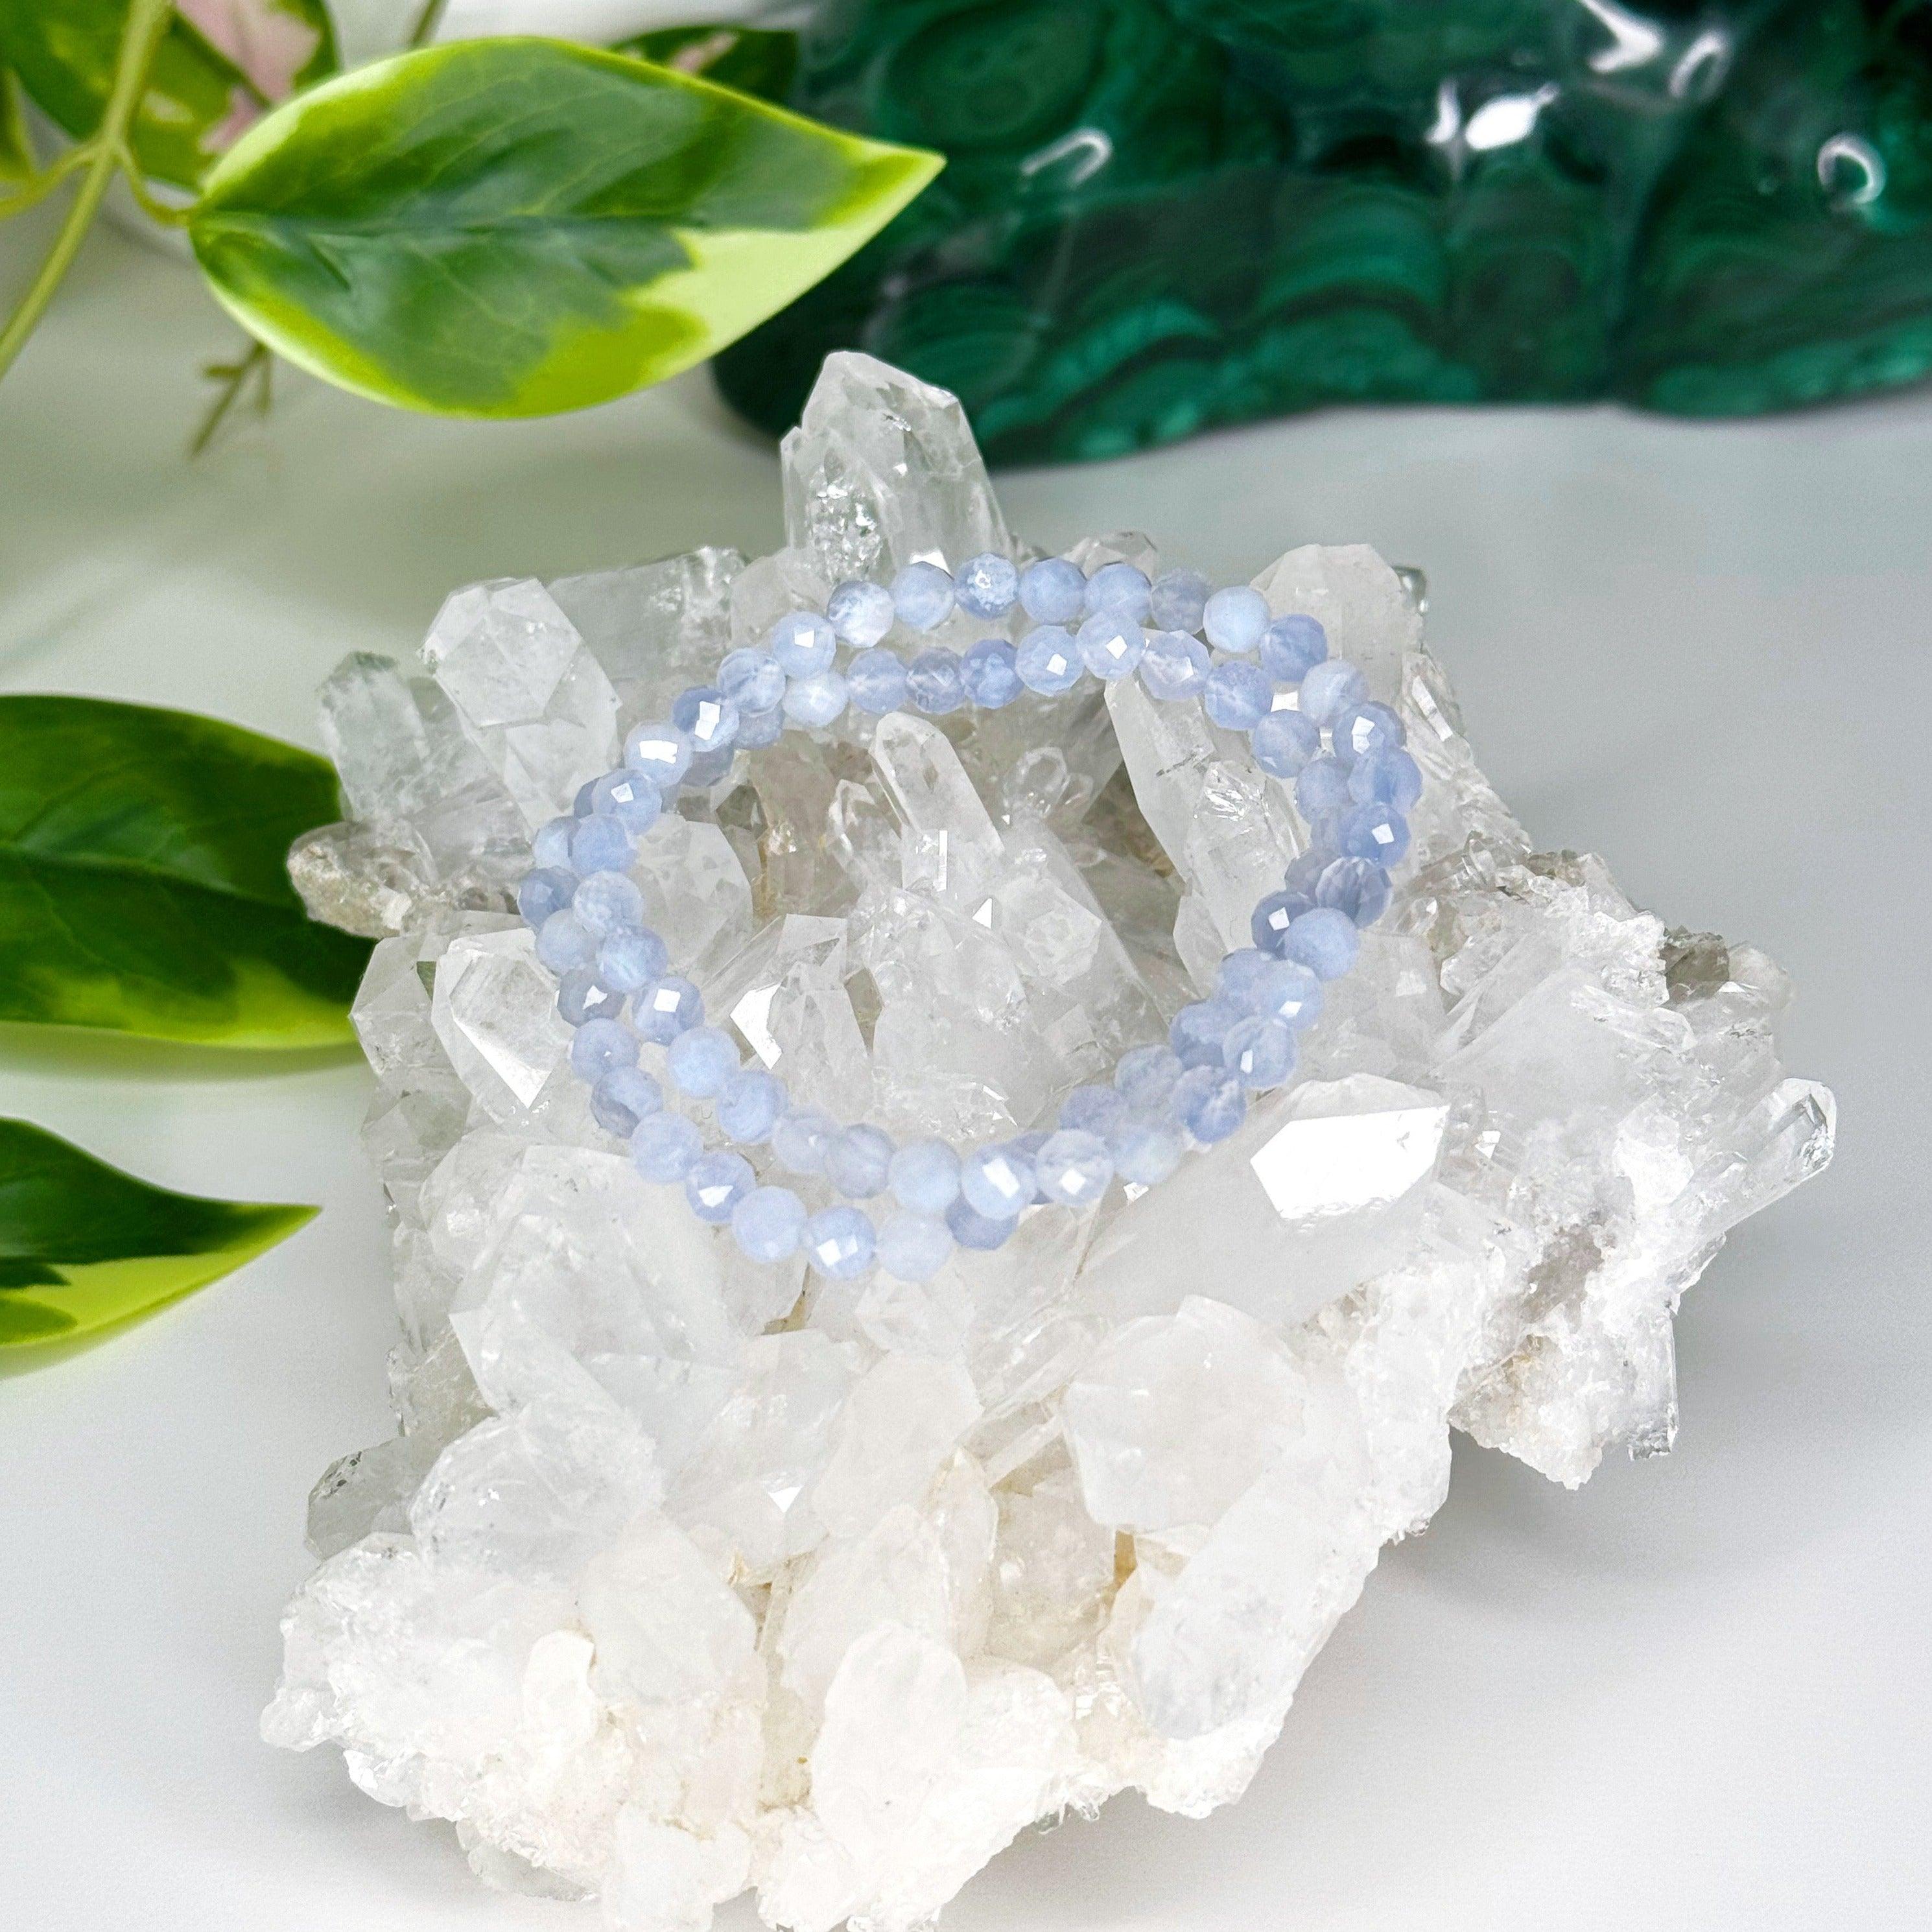 BLUE LACE AGATE (FACETED) 5mm - HANDMADE CRYSTAL BRACELET - 5mm, air, blue, blue lace agate, bracelet, capricorn, capricorn stack, crystal bracelet, emotional support, faceted, gemini, gemini stack, handmade bracelet, jewelry, libra, libra stack, market bracelet, mercury retrograde, mercury retrograde stack, pisces, pisces stack, recently added, sagittarius, sagittarius stack, single bracelets, summer vibes, virgo, virgo stack, Wearable, winter collection, winter solstice collection - The Mineral Maven